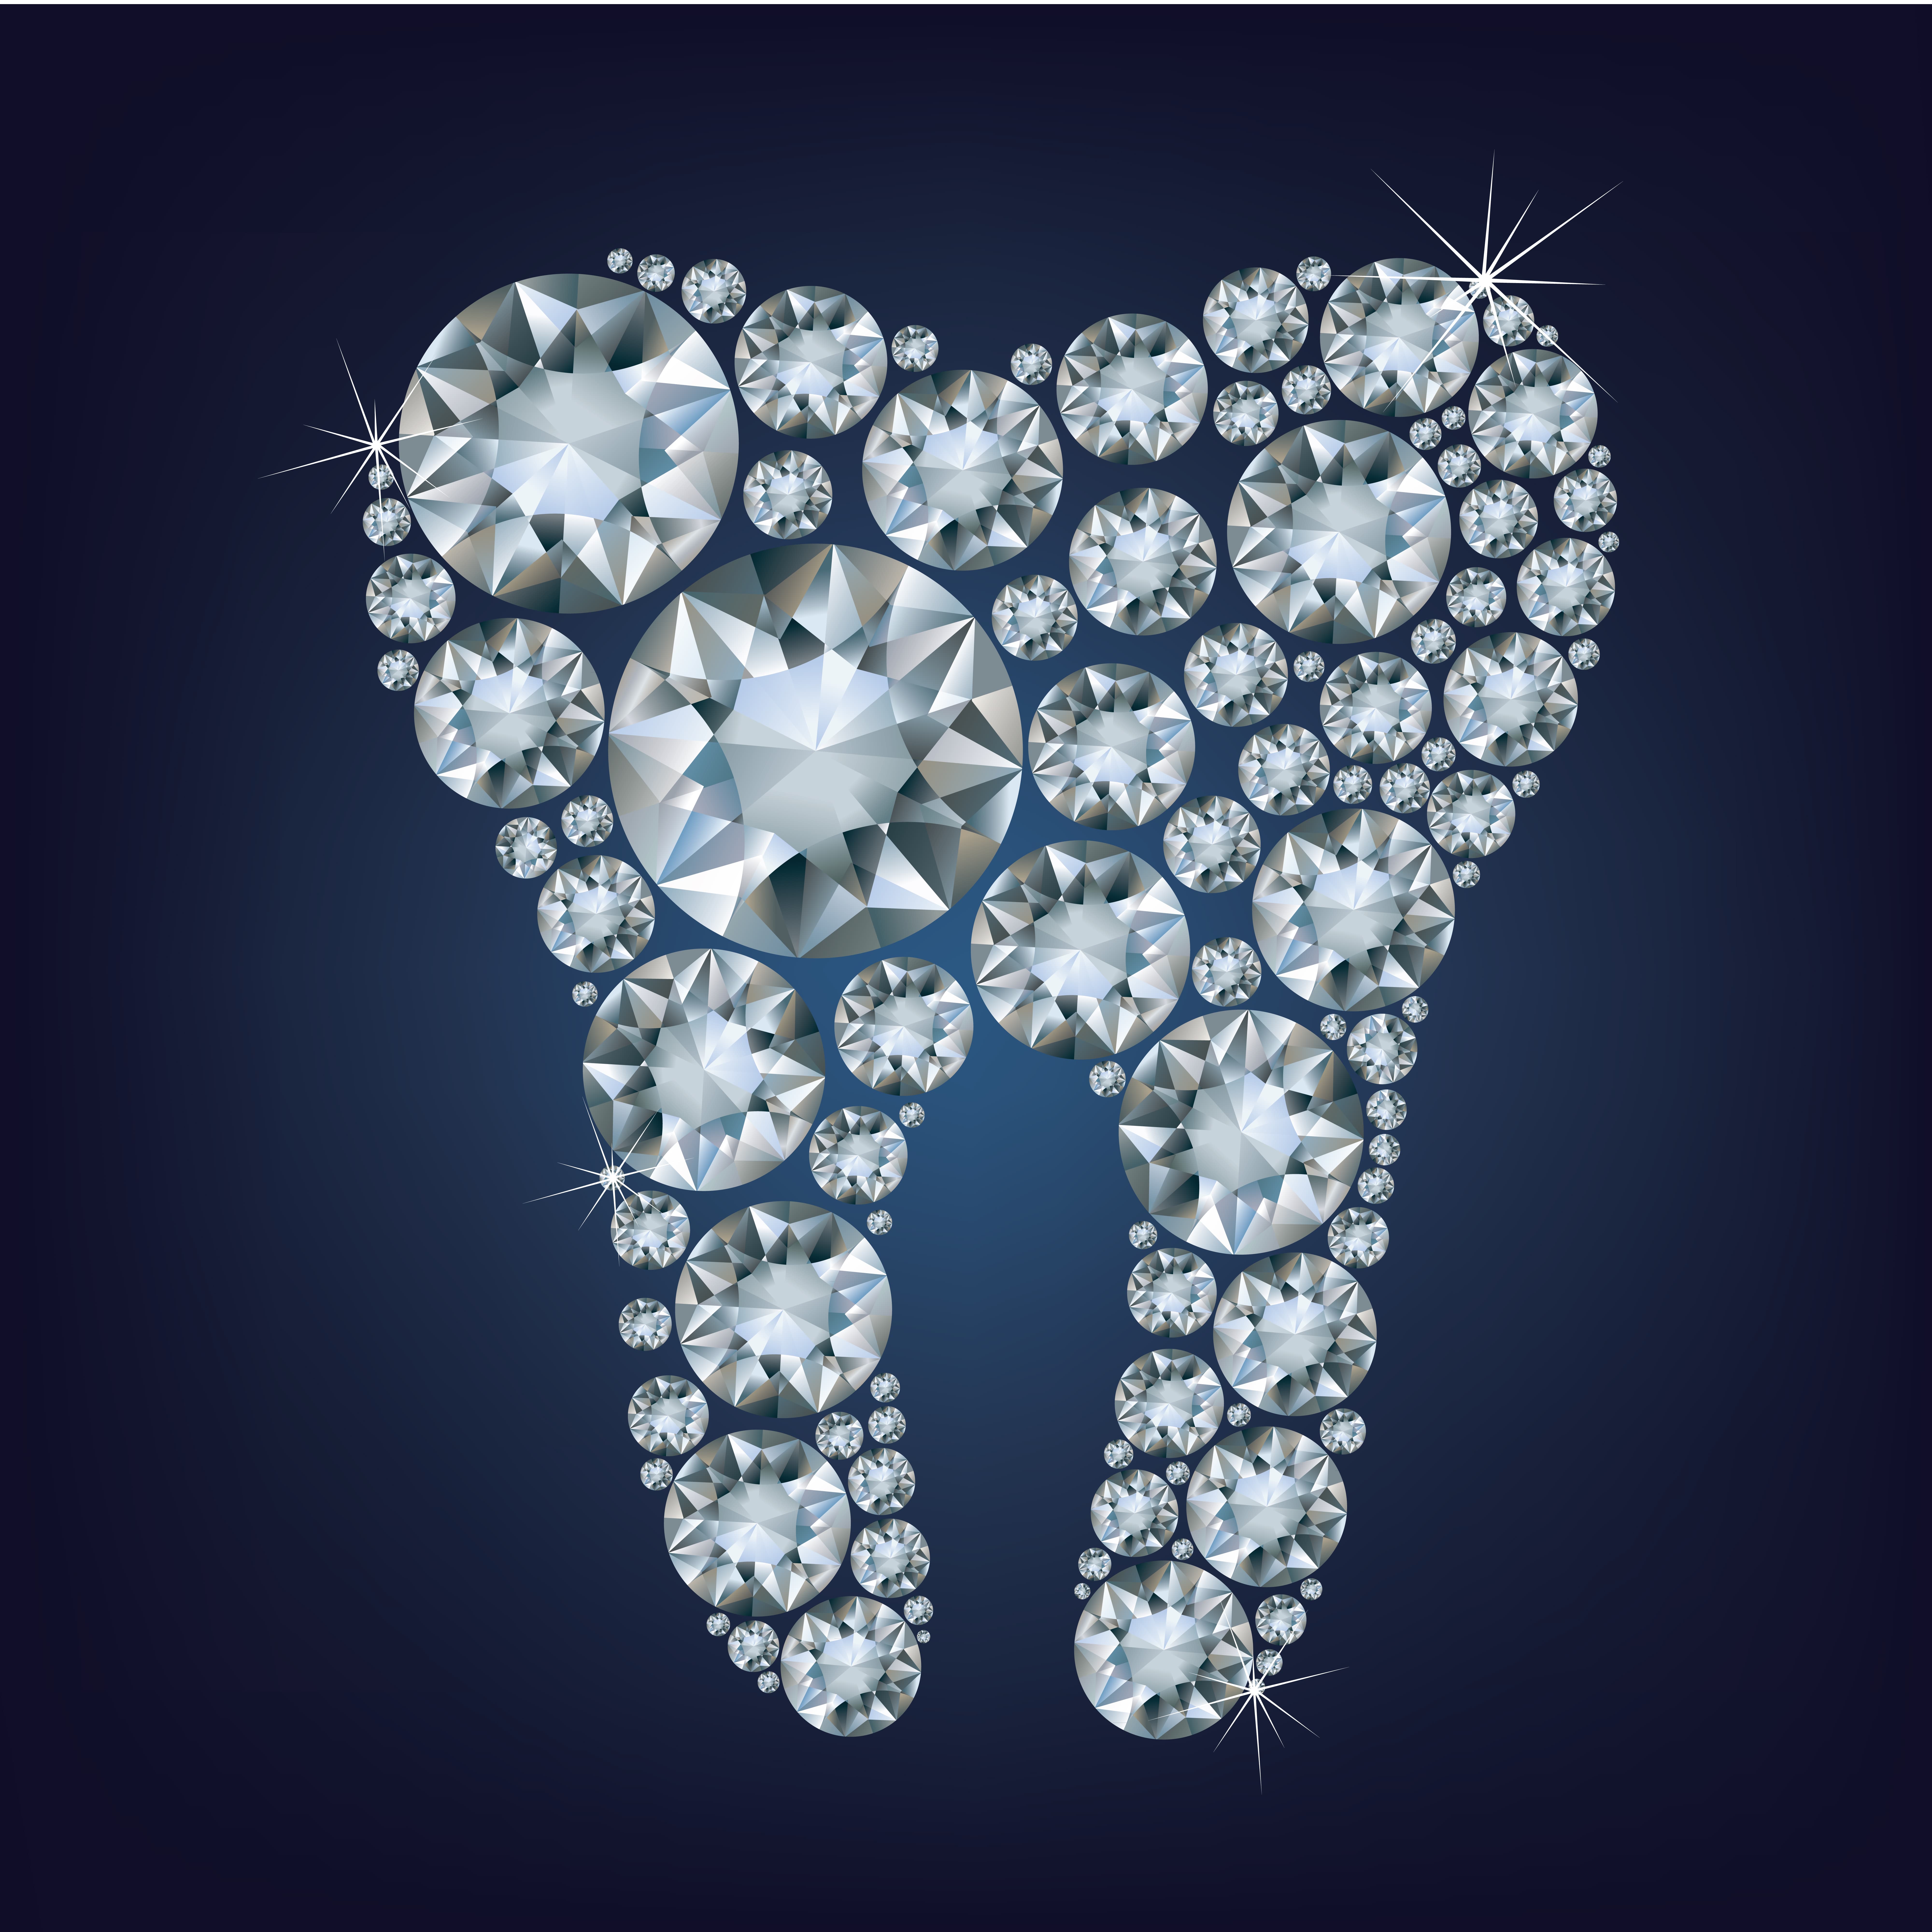 Diamonds of various sizes arranged into the shape of a tooth on a navy background